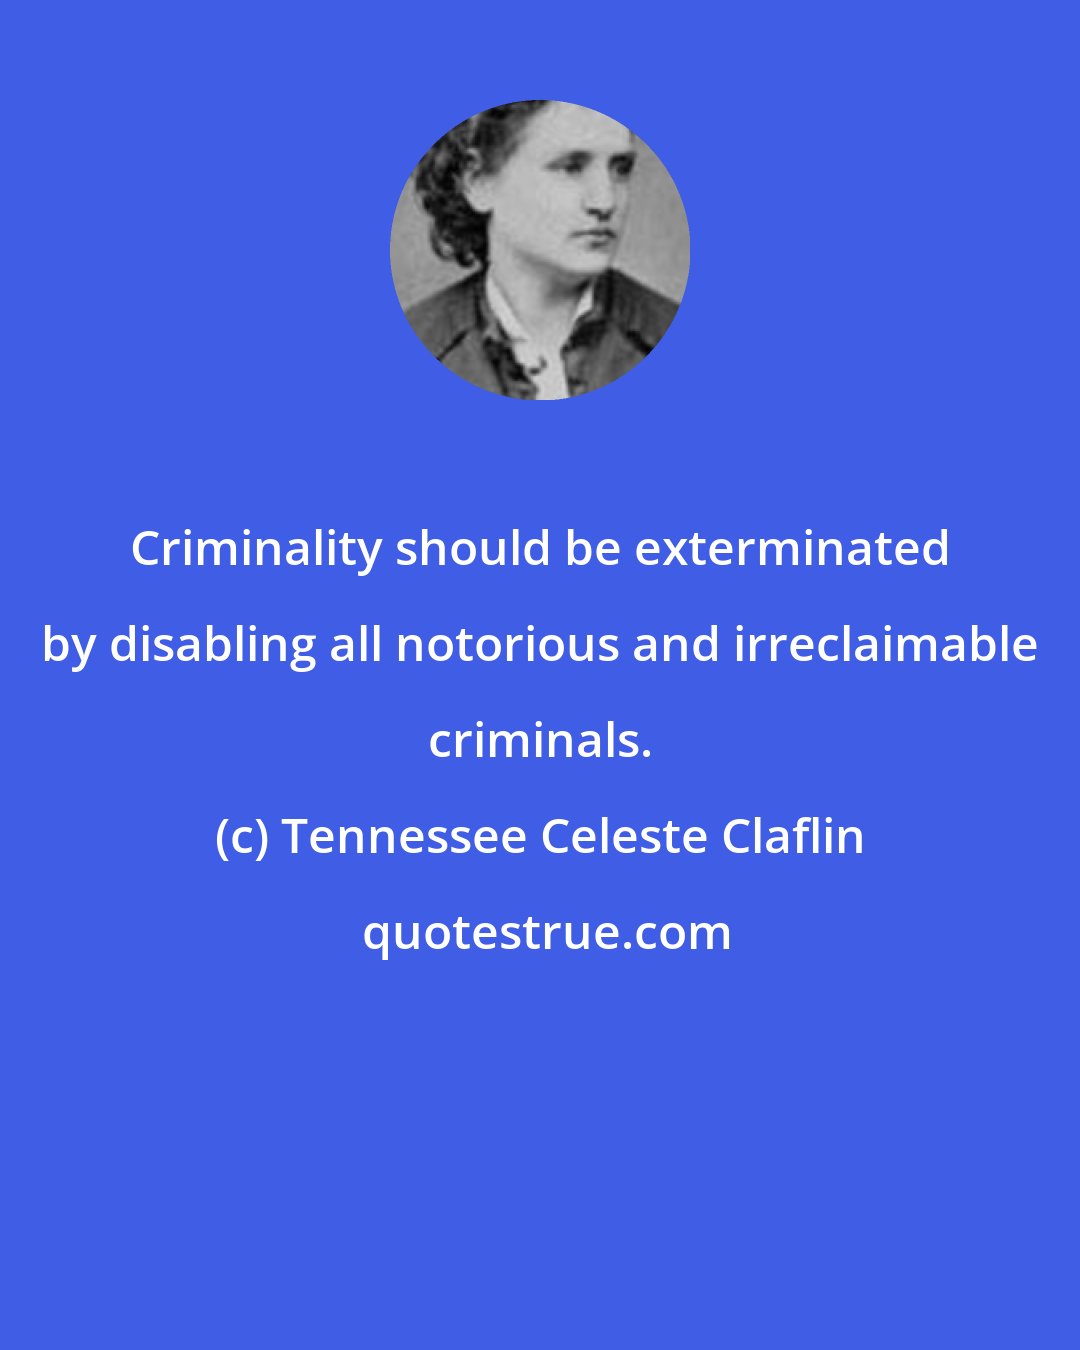 Tennessee Celeste Claflin: Criminality should be exterminated by disabling all notorious and irreclaimable criminals.